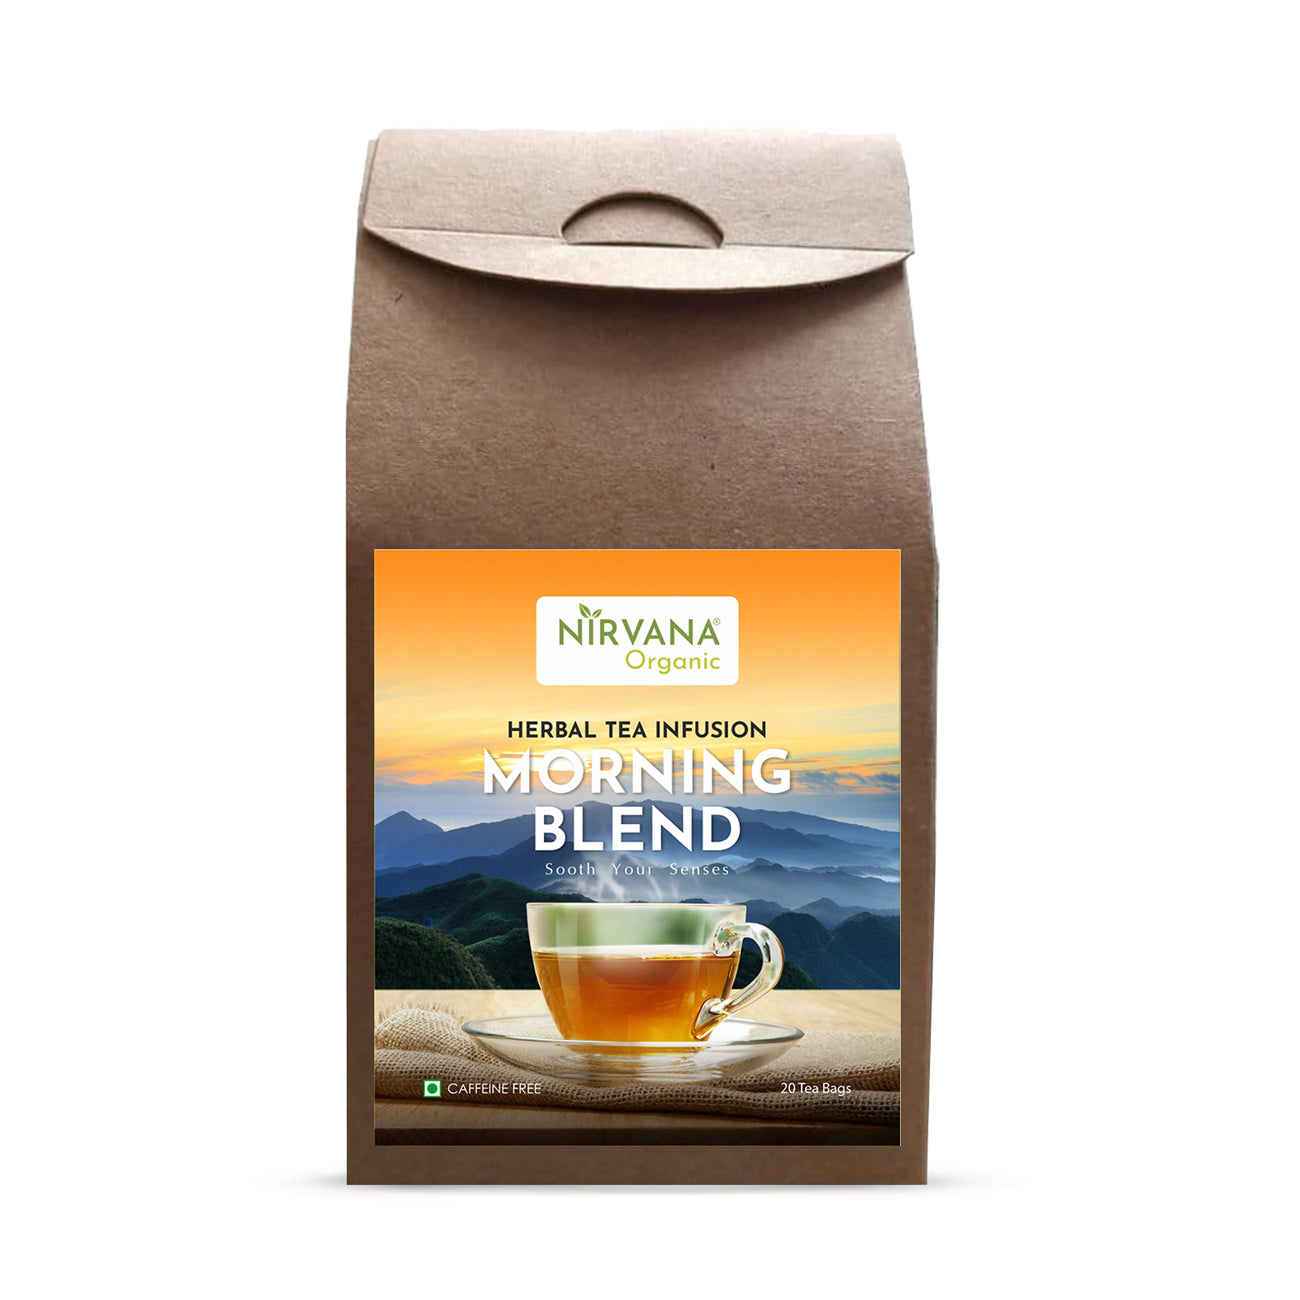 Morning Blend Herbal Tea Infusion